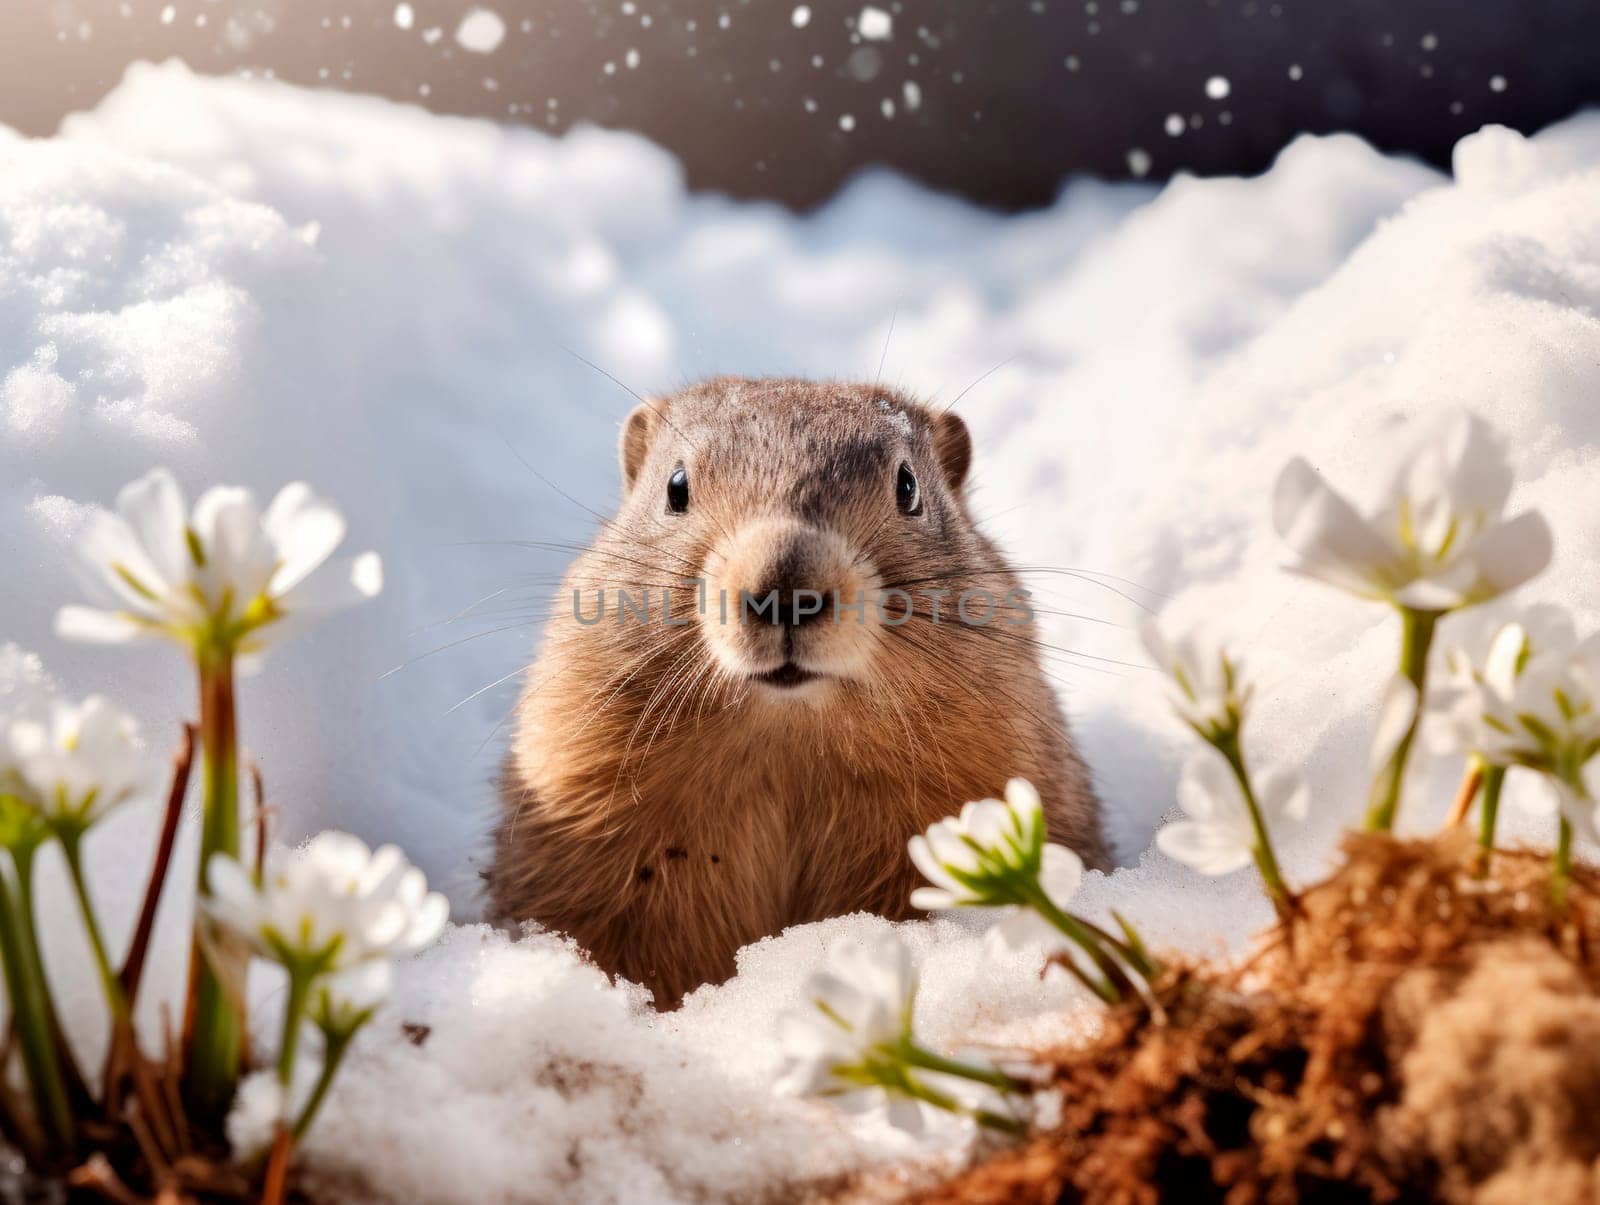 The groundhog came out of his hole. by Spirina